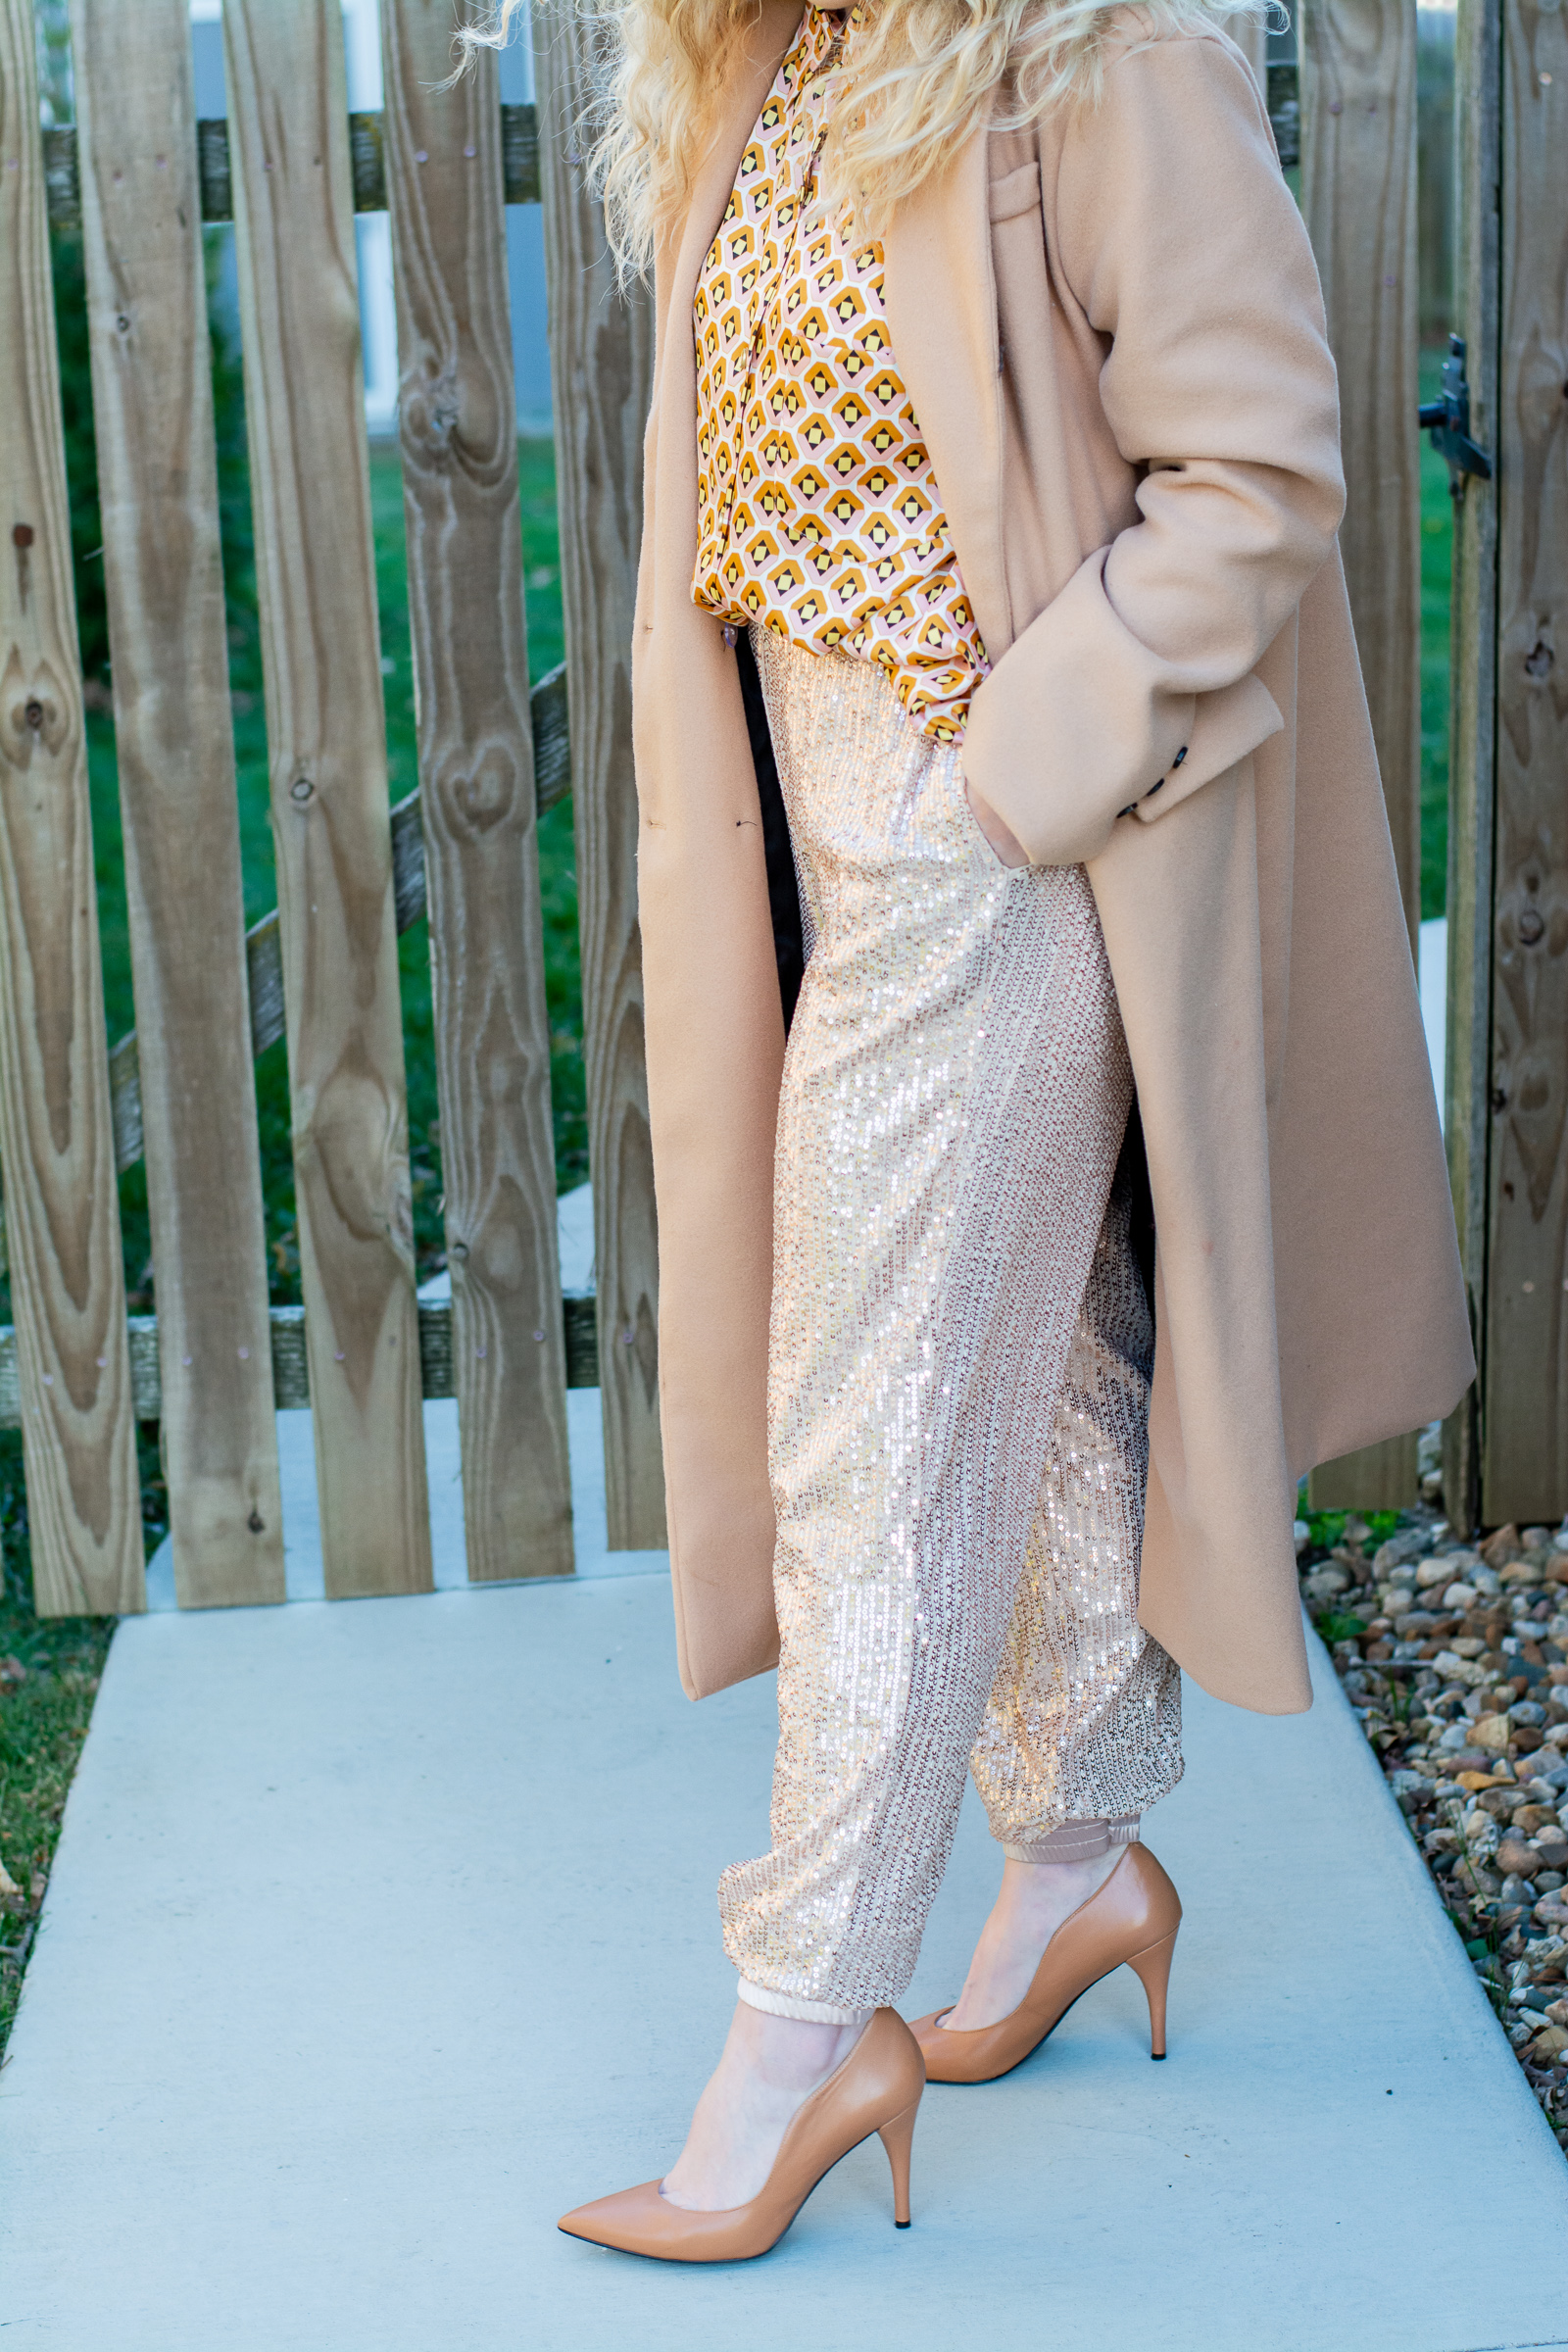 A Neutral But Not Boring NYE Outfit. | LSR